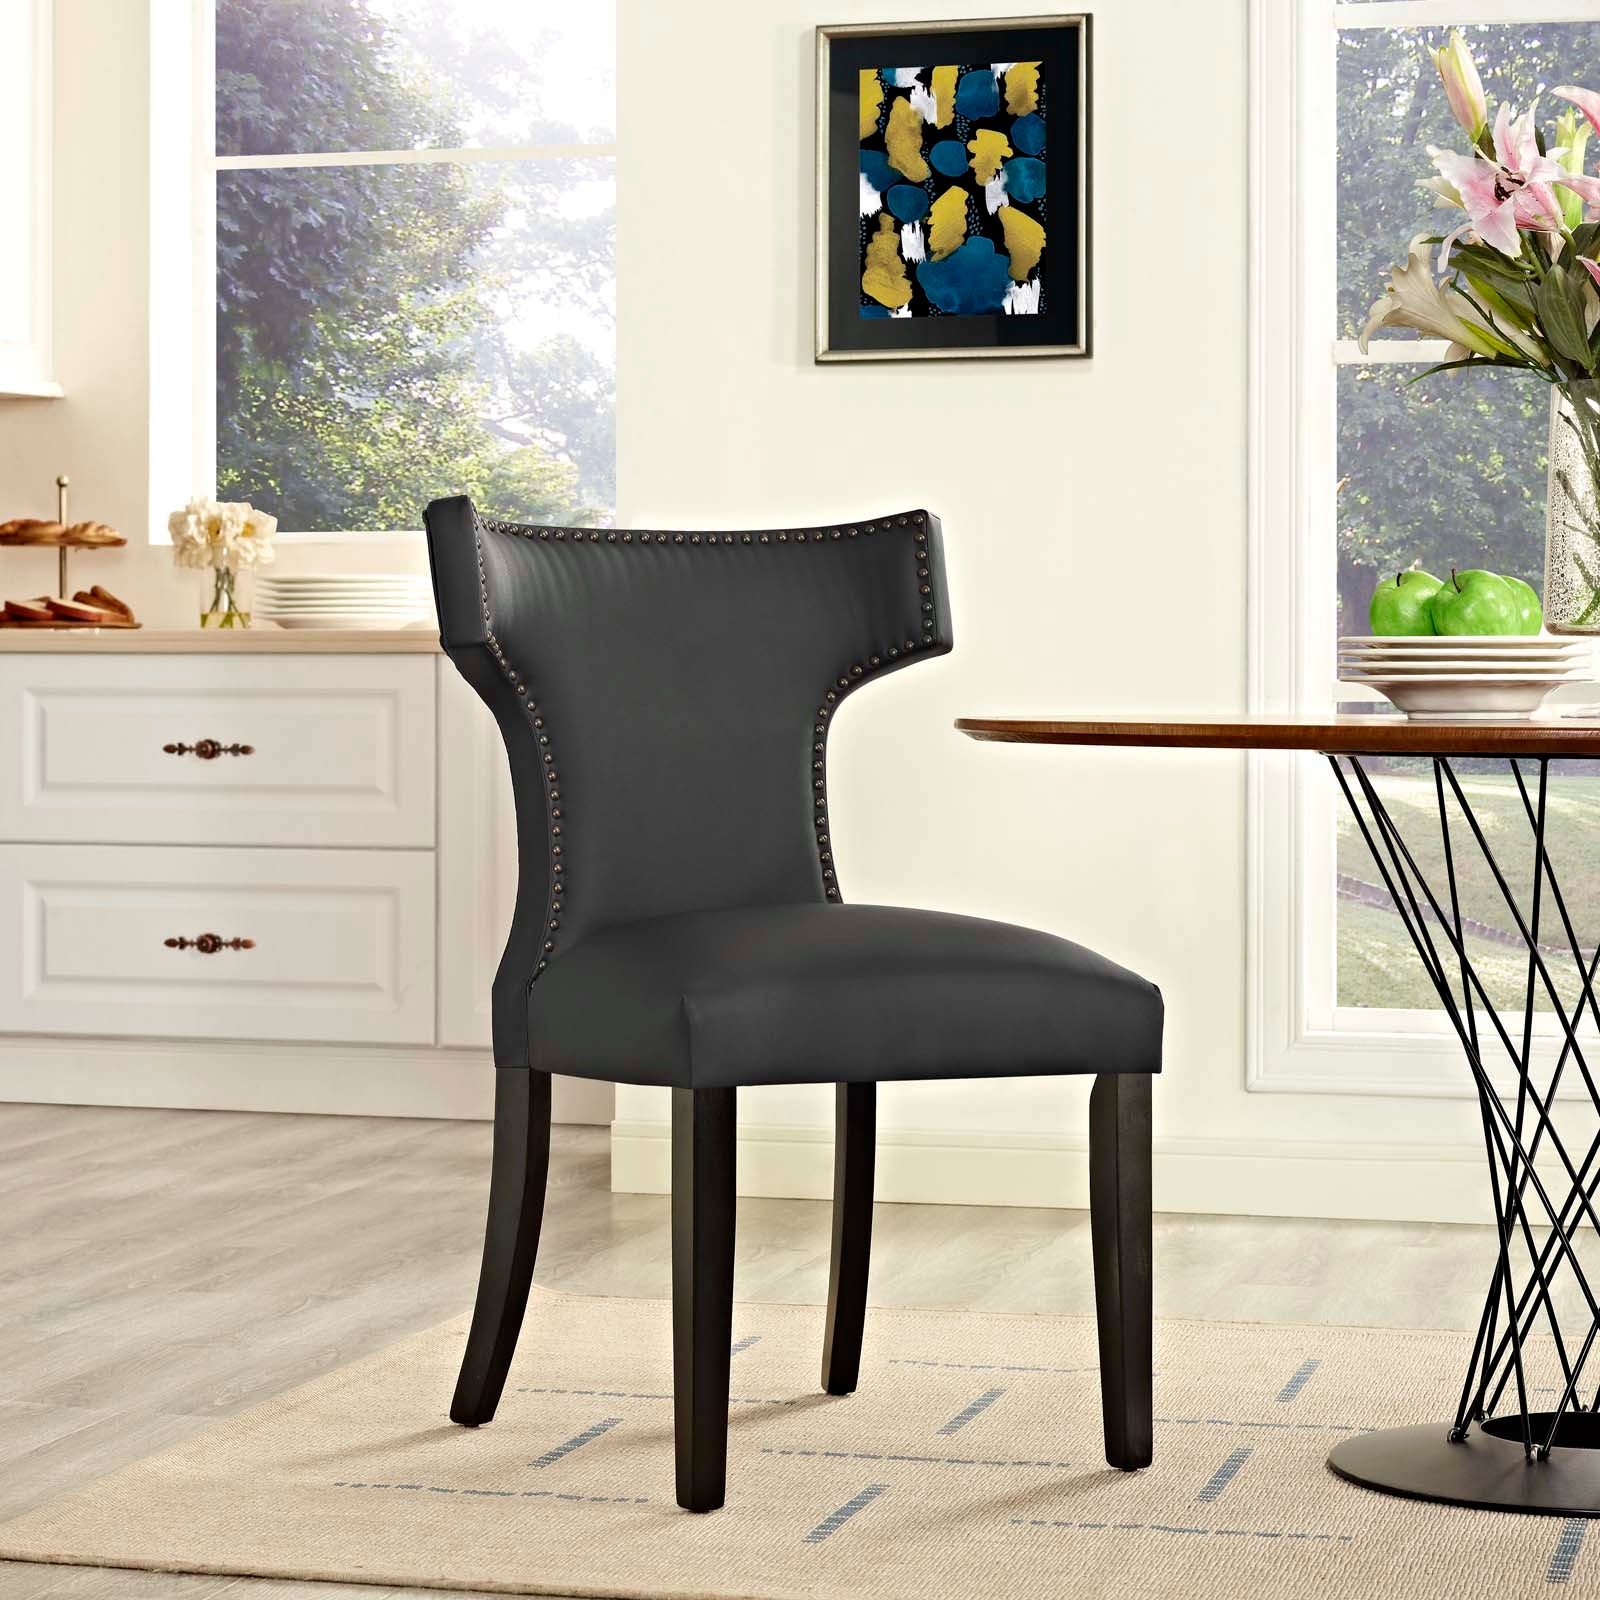 Curve Vinyl Dining Chair - East Shore Modern Home Furnishings